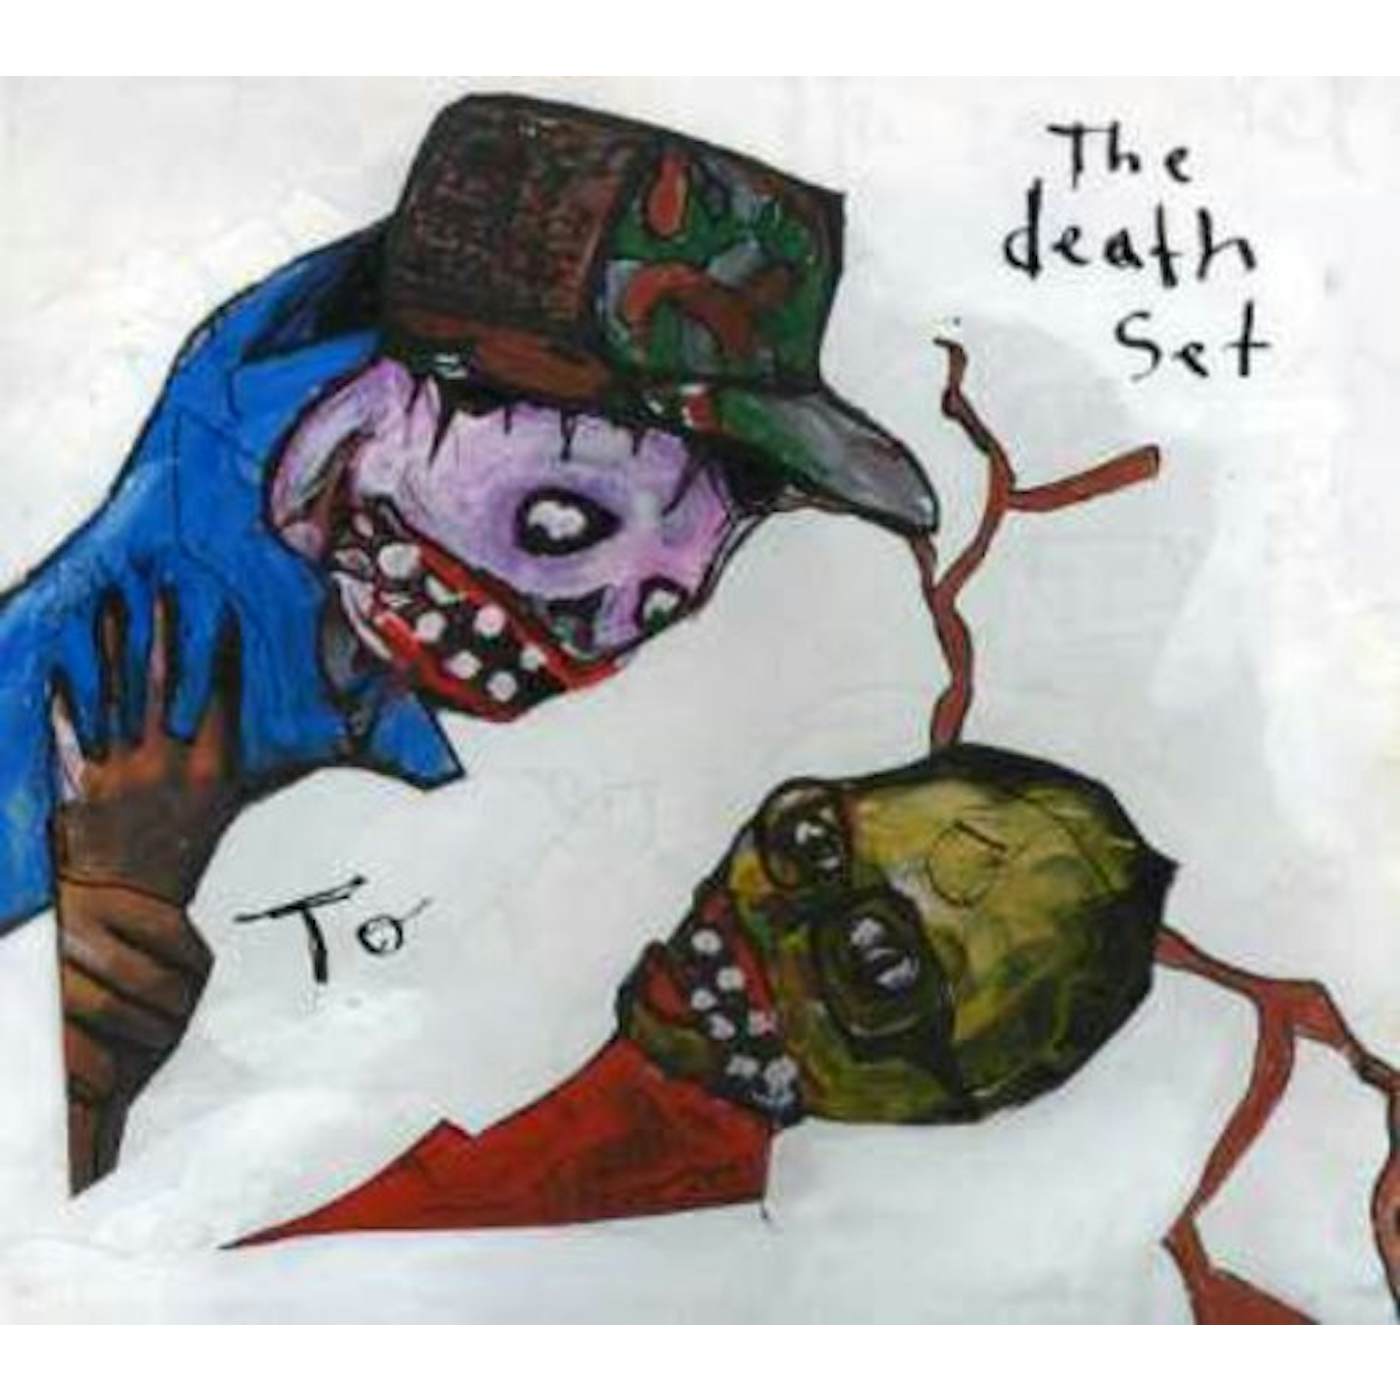 The Death Set TO CD